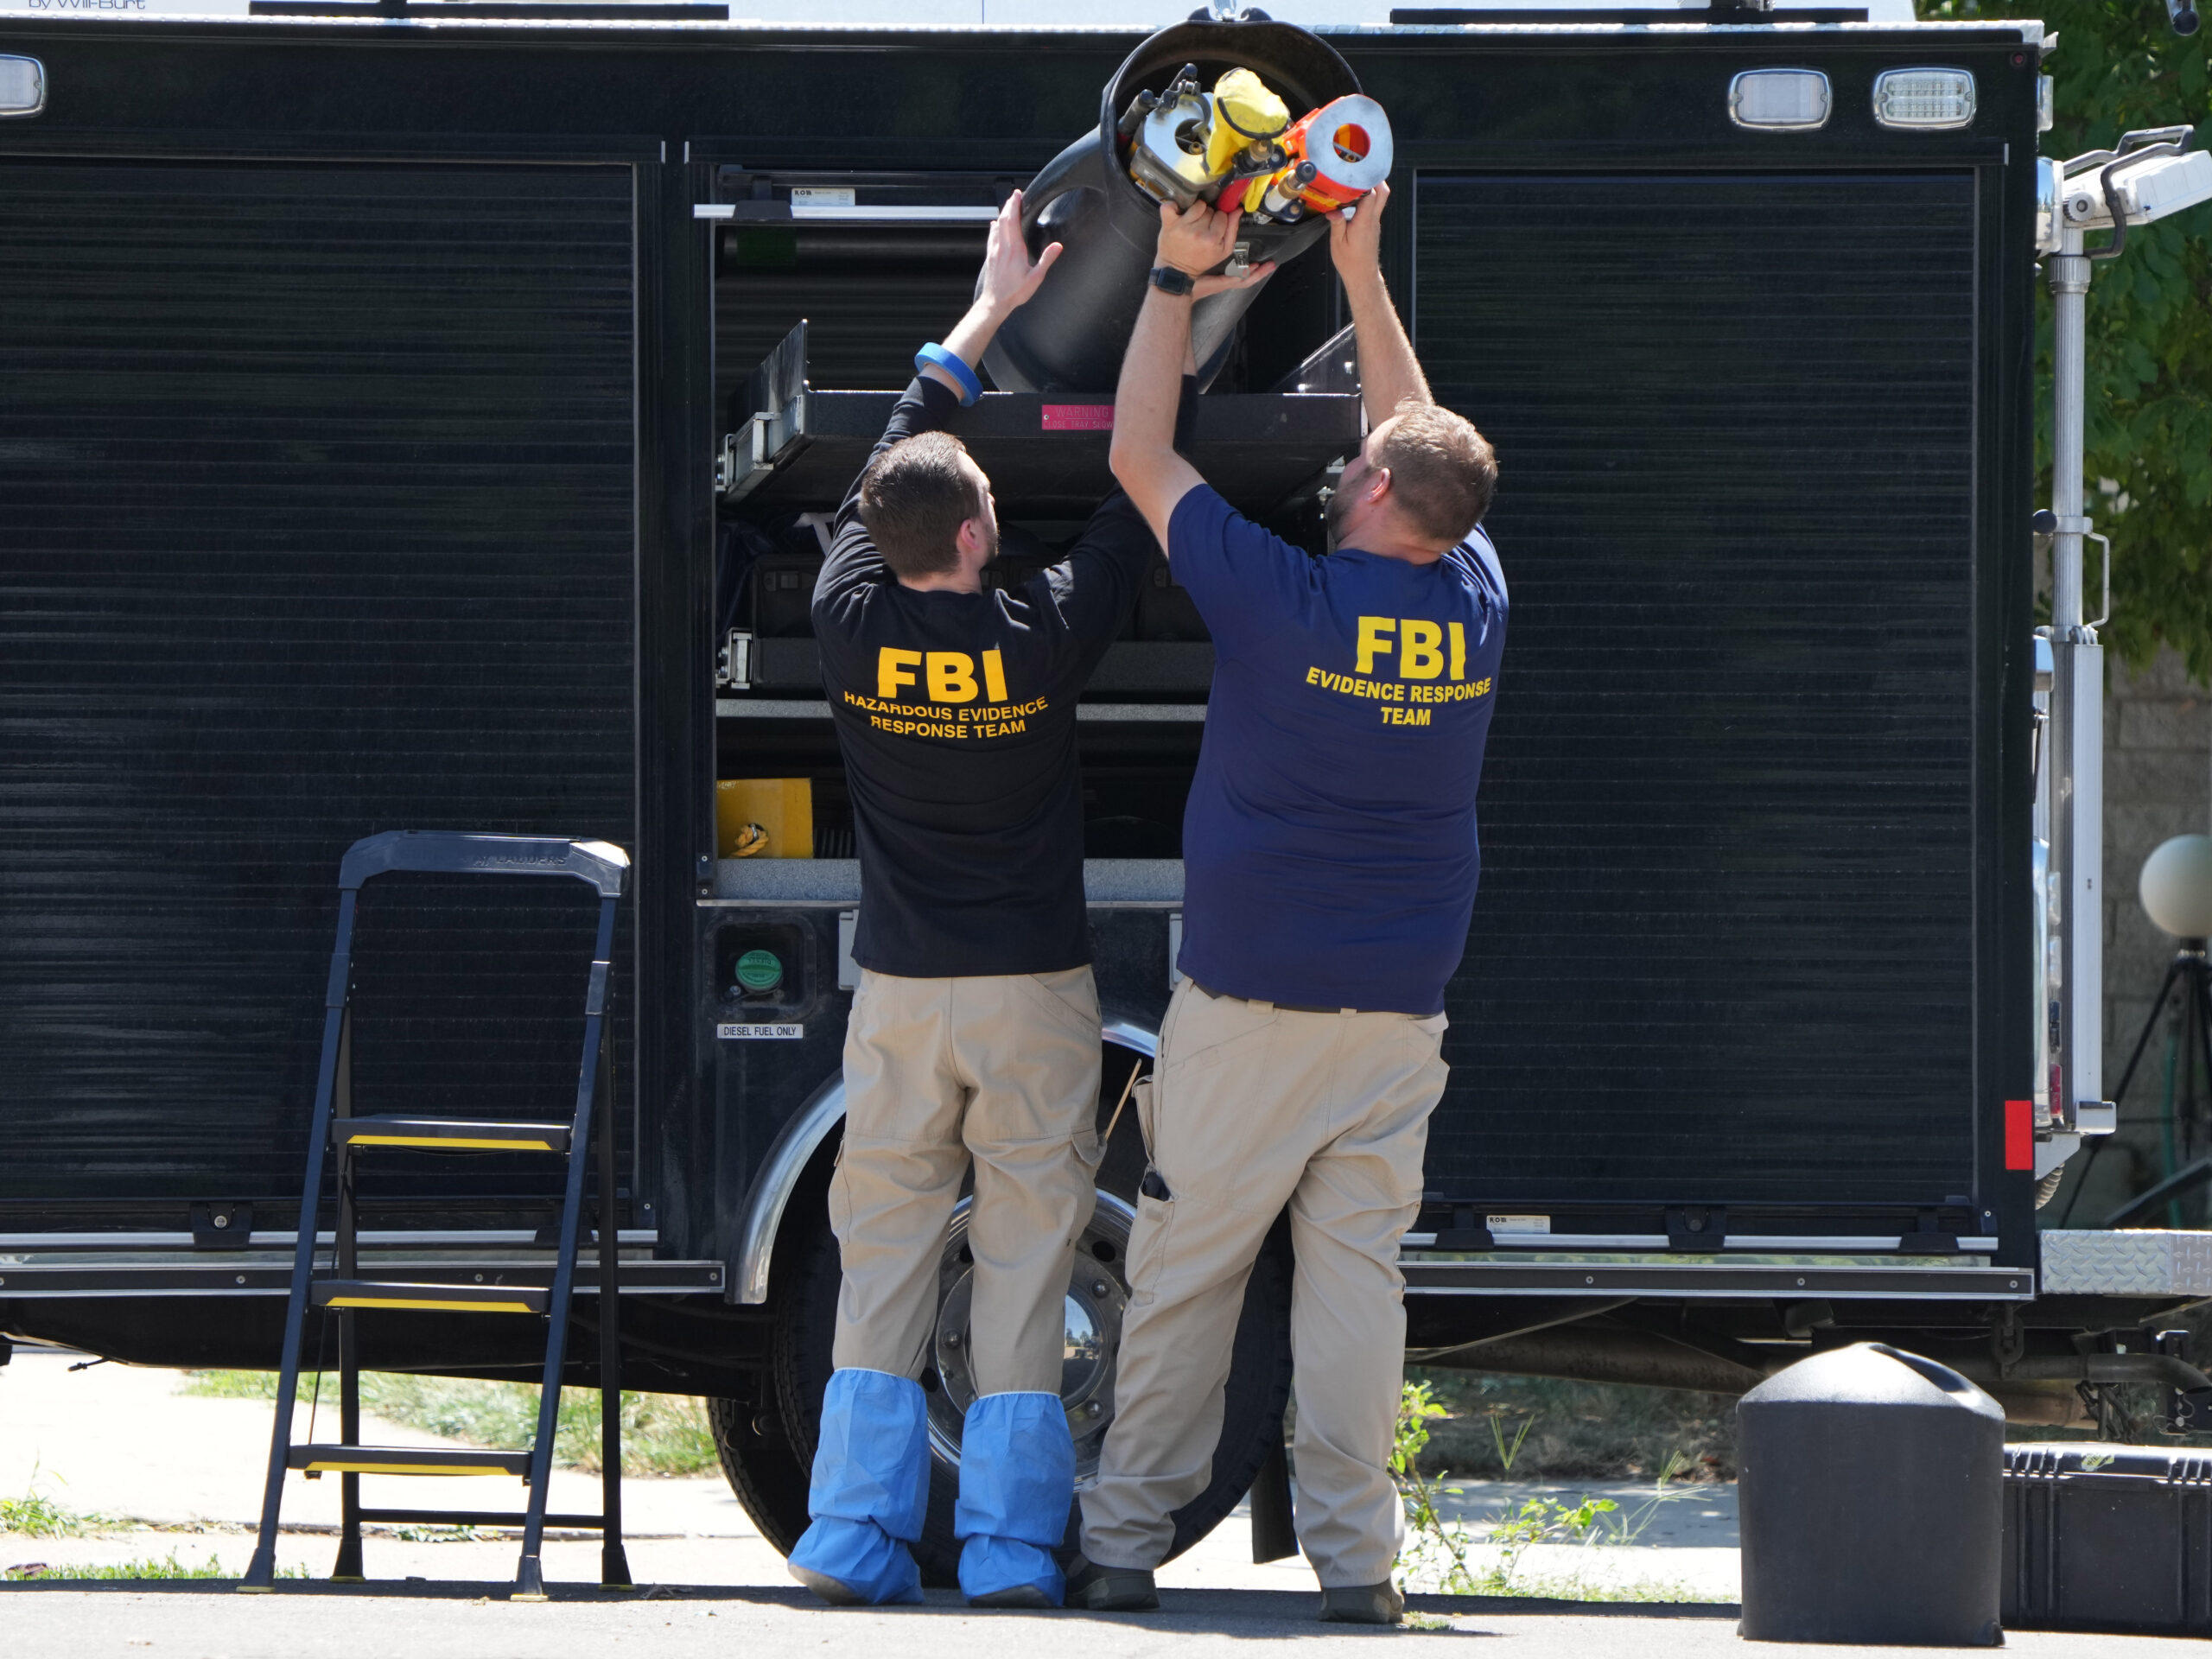 Two people in FBI shirts unload equipment from a truck outside 